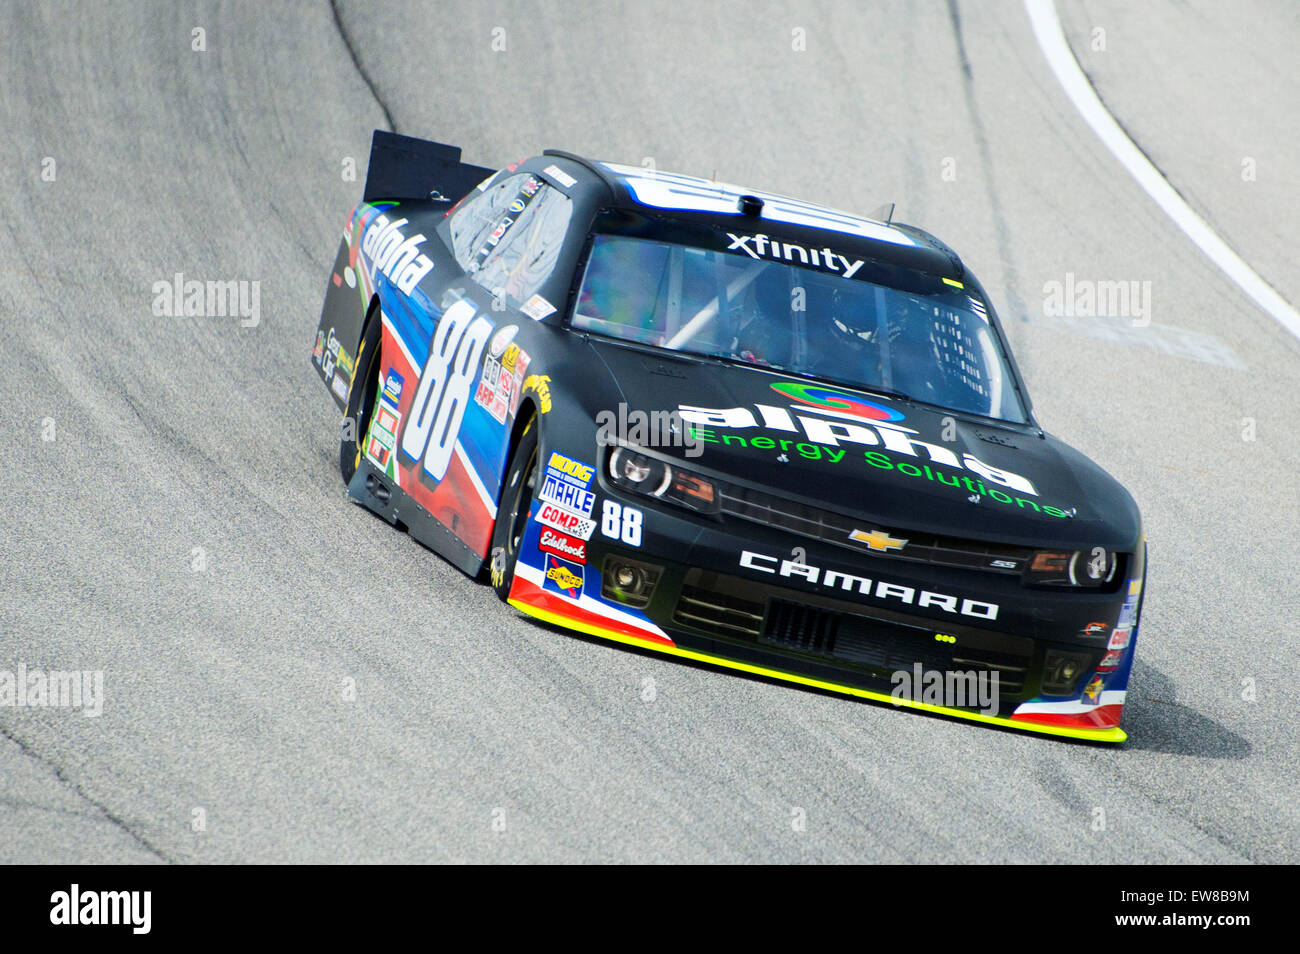 Joliet, IL, USA. 14th Mar, 2015. Joliet, IL - Jun 19, 2015: Ben Rhodes (88) takes to the track for the Owens Corning AttiCat 300 at Chicagoland Speedway in Joliet, IL. © csm/Alamy Live News Stock Photo